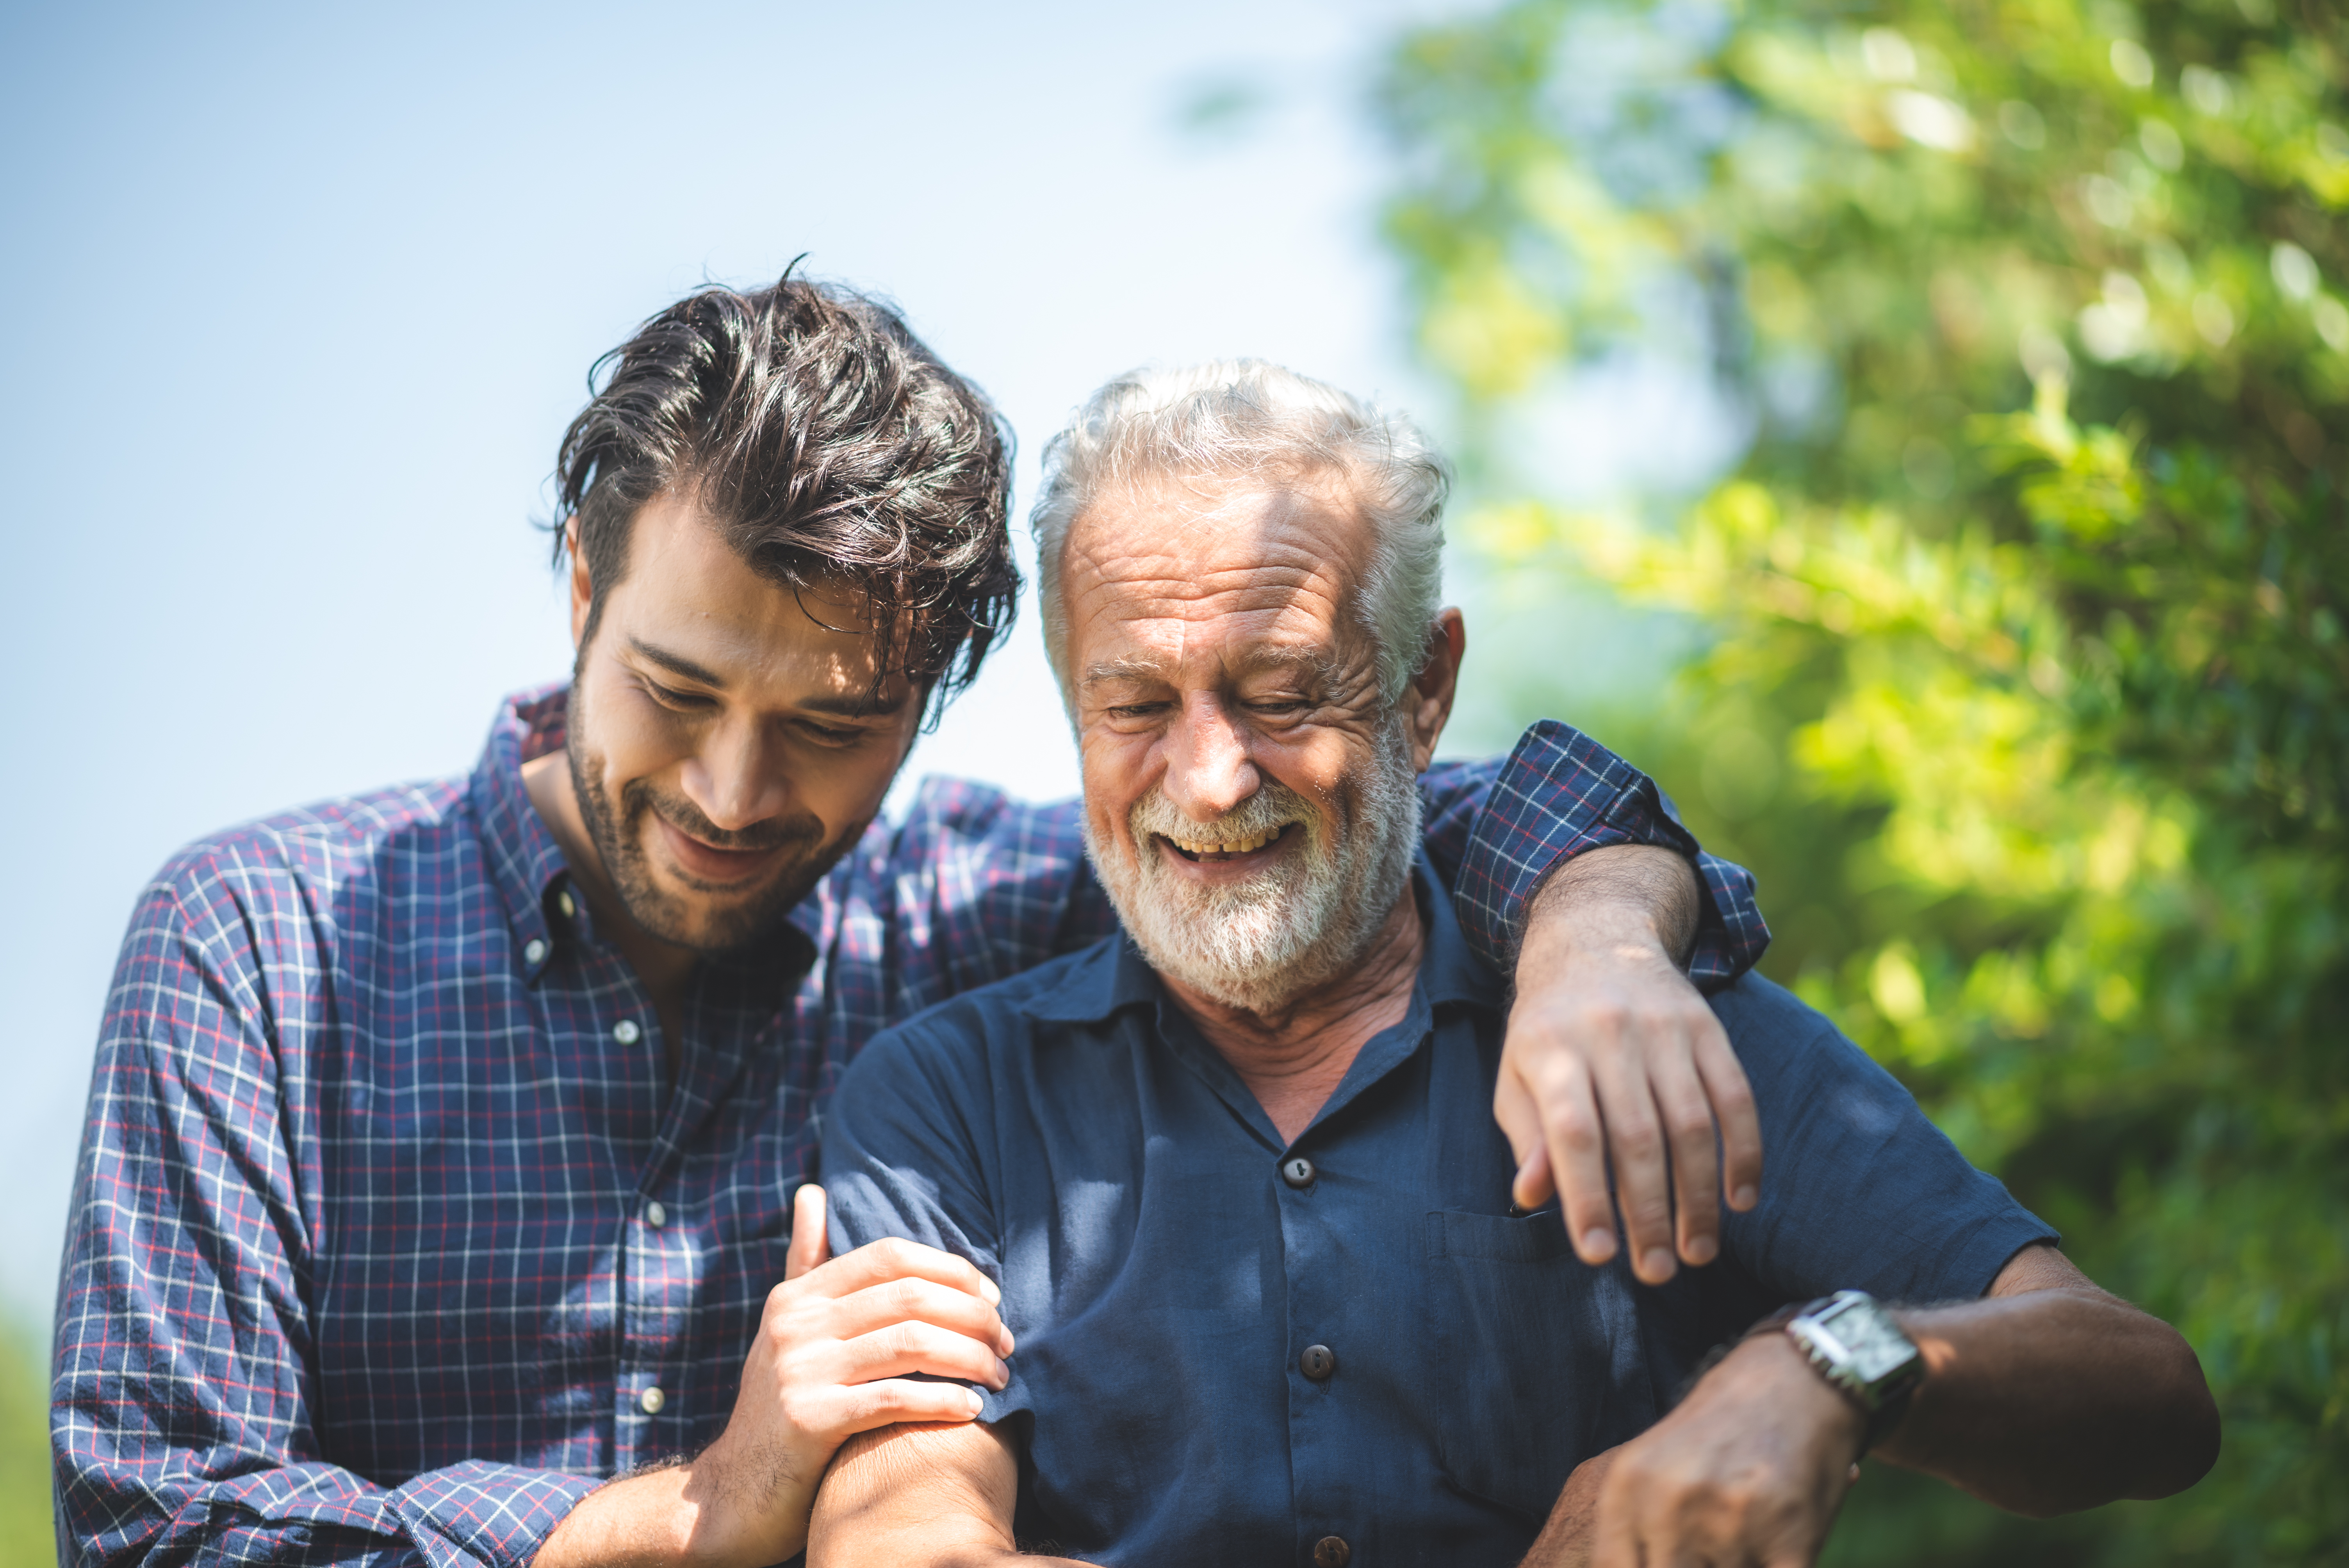 A young man with an older man | Source: Shutterstock